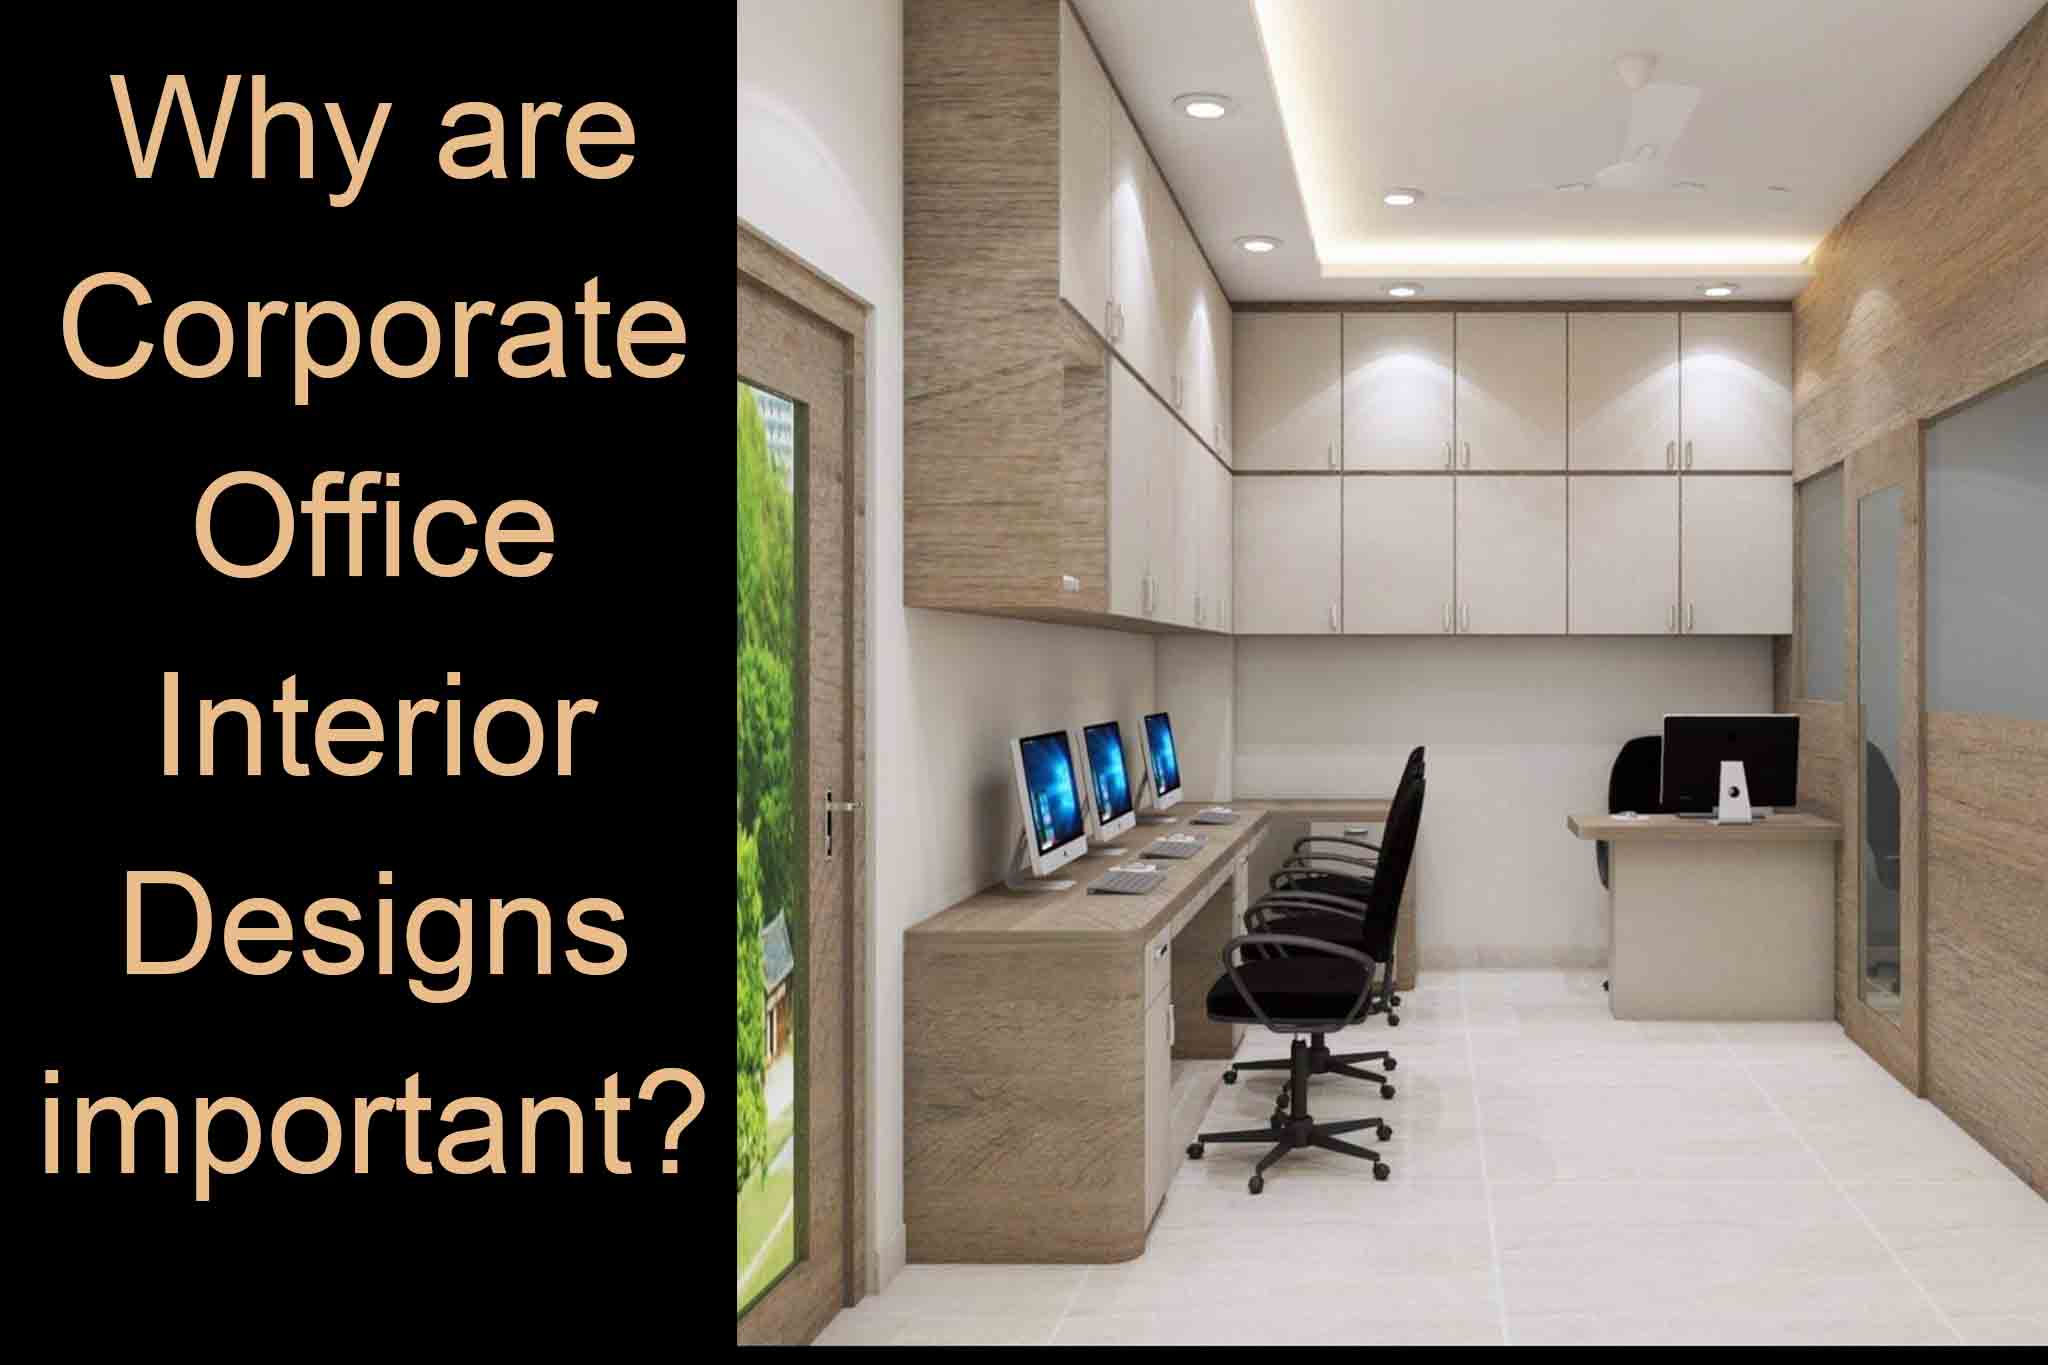 Why are Corporate Office Interior Designs important?